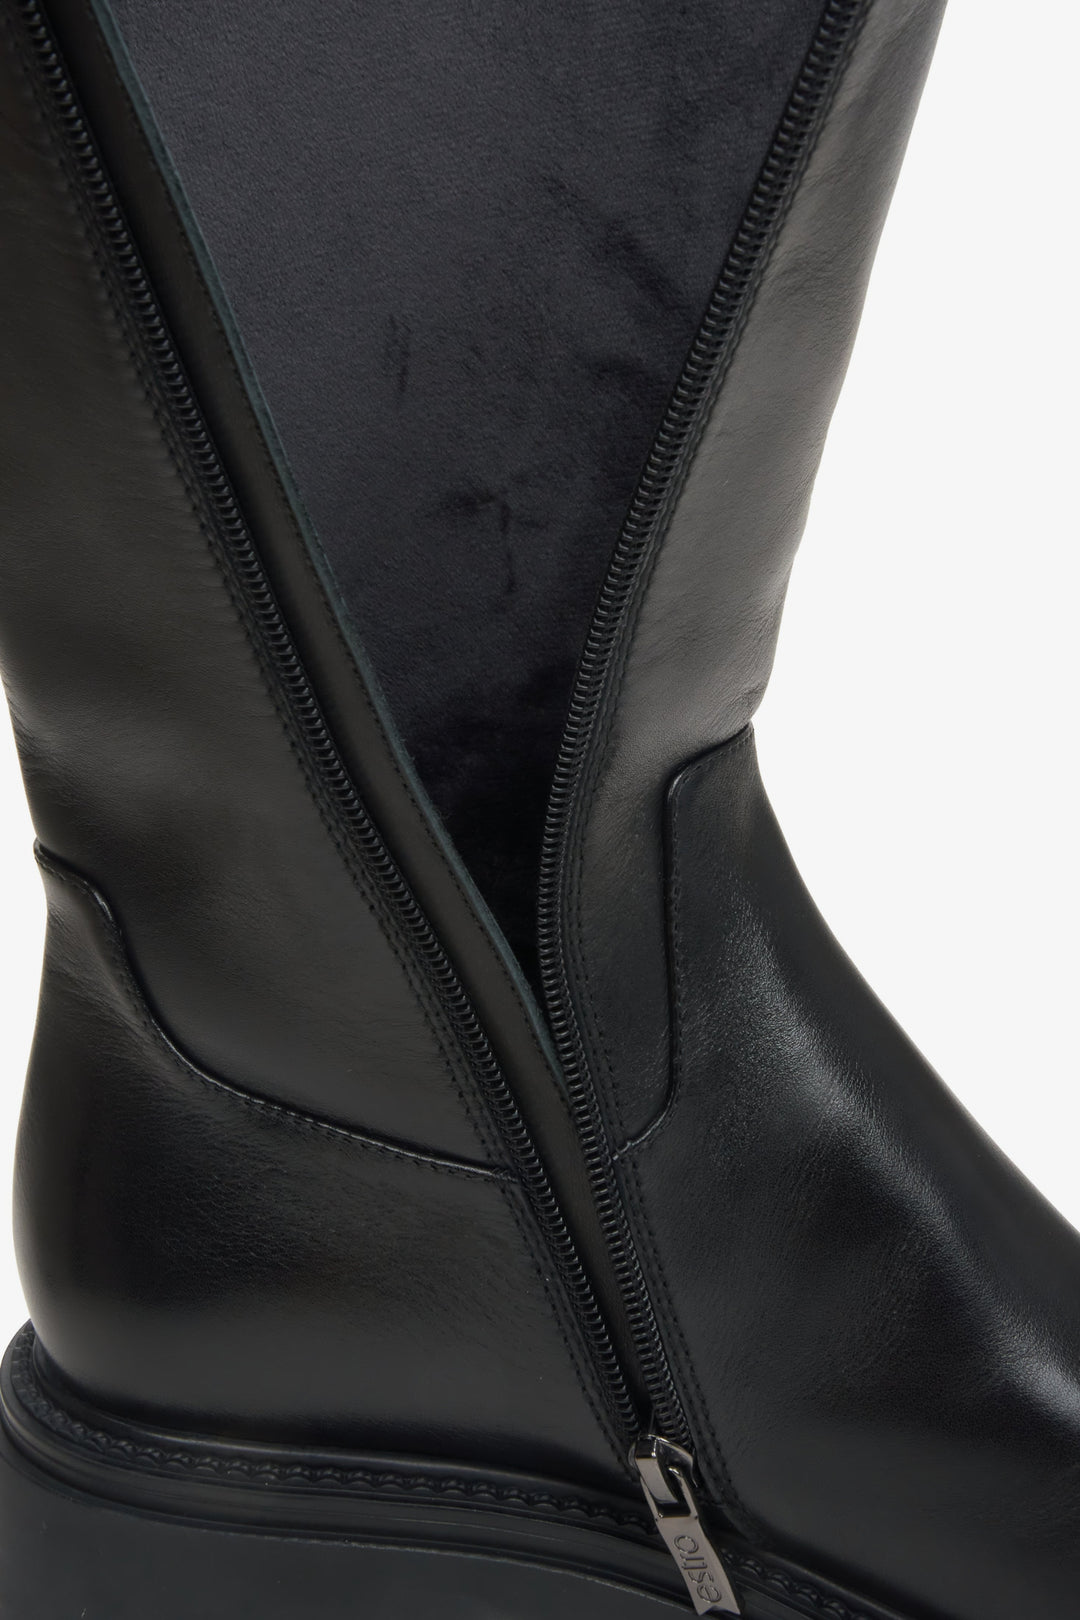 Women's black leather boots by Estro - close-up on the soft lining.